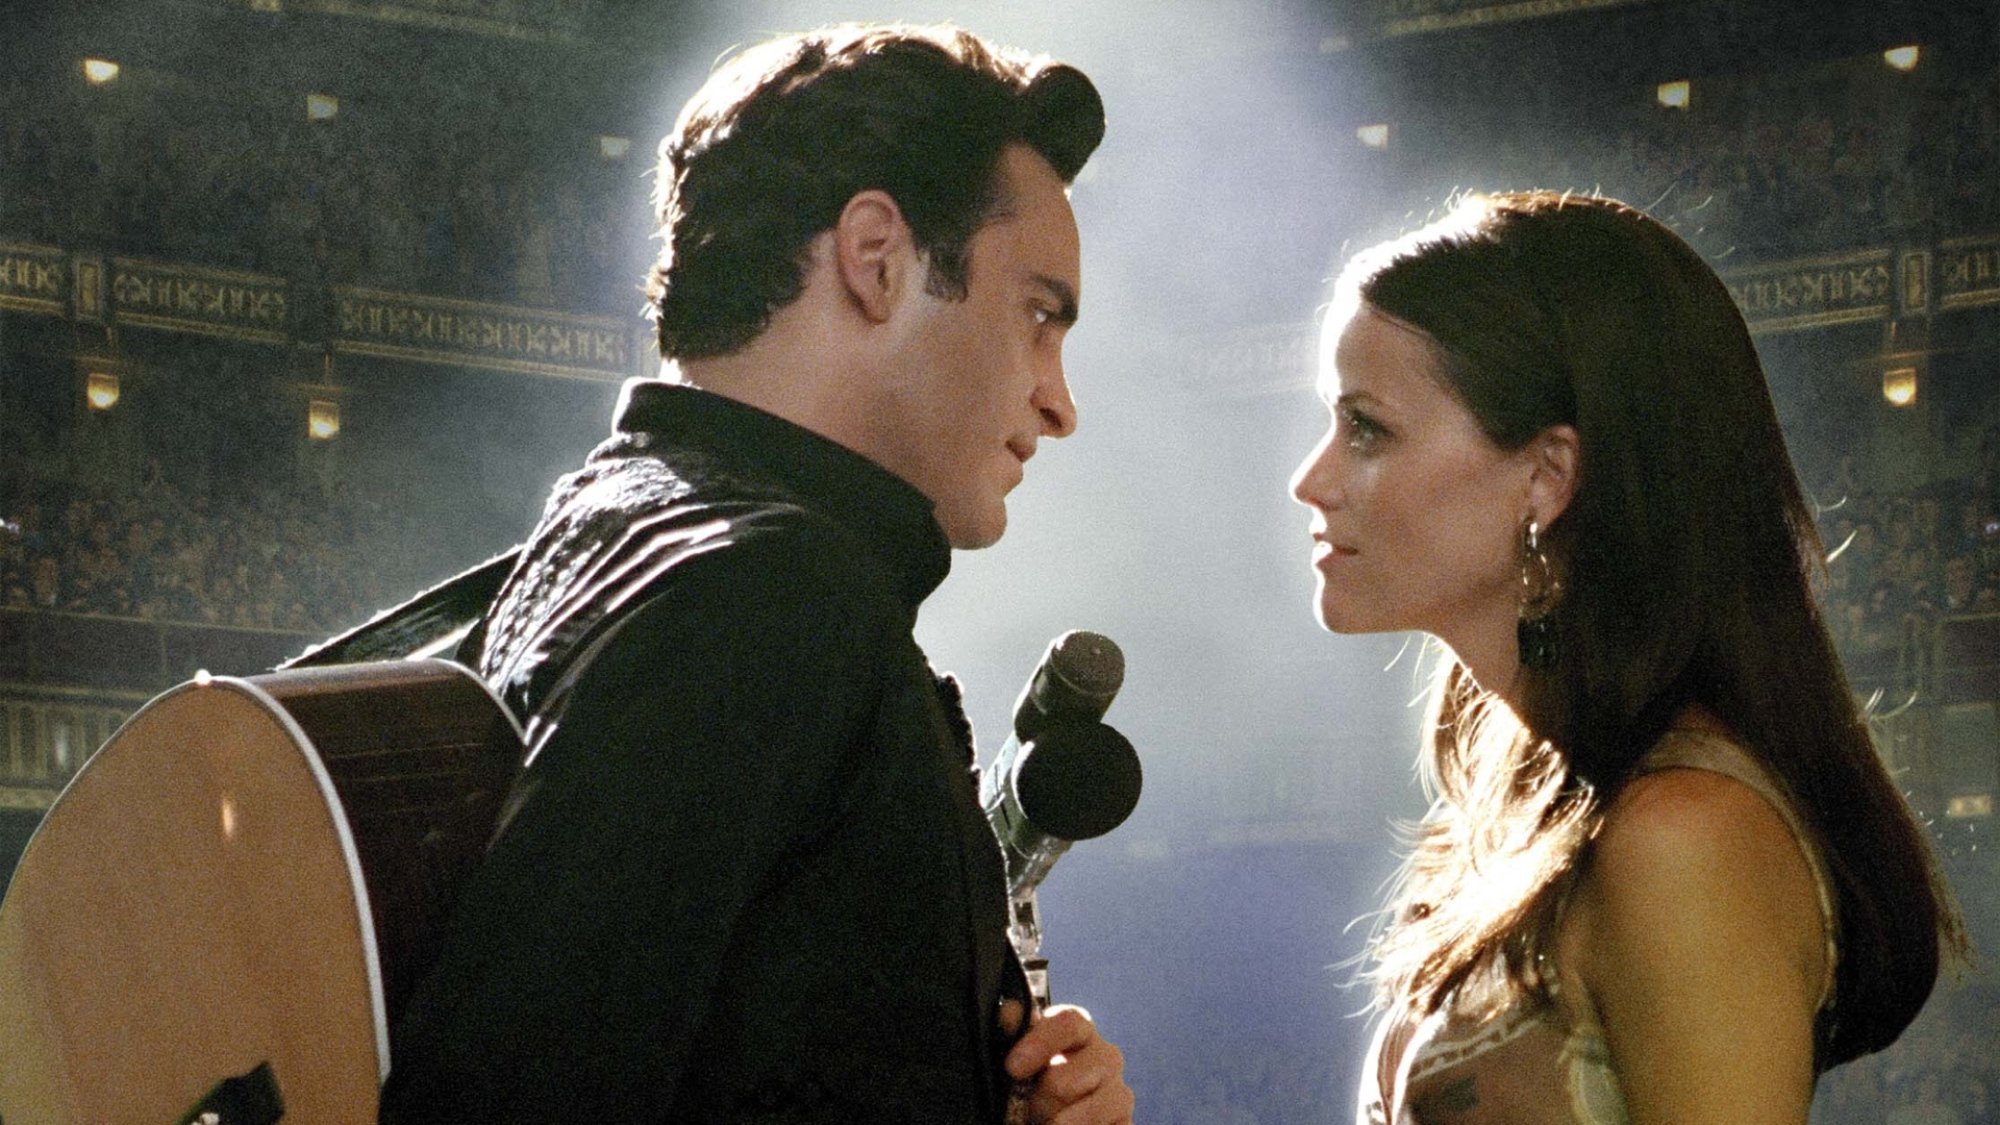 Joaquin Phoenix and Reese Witherspoon in "Walk the Line."